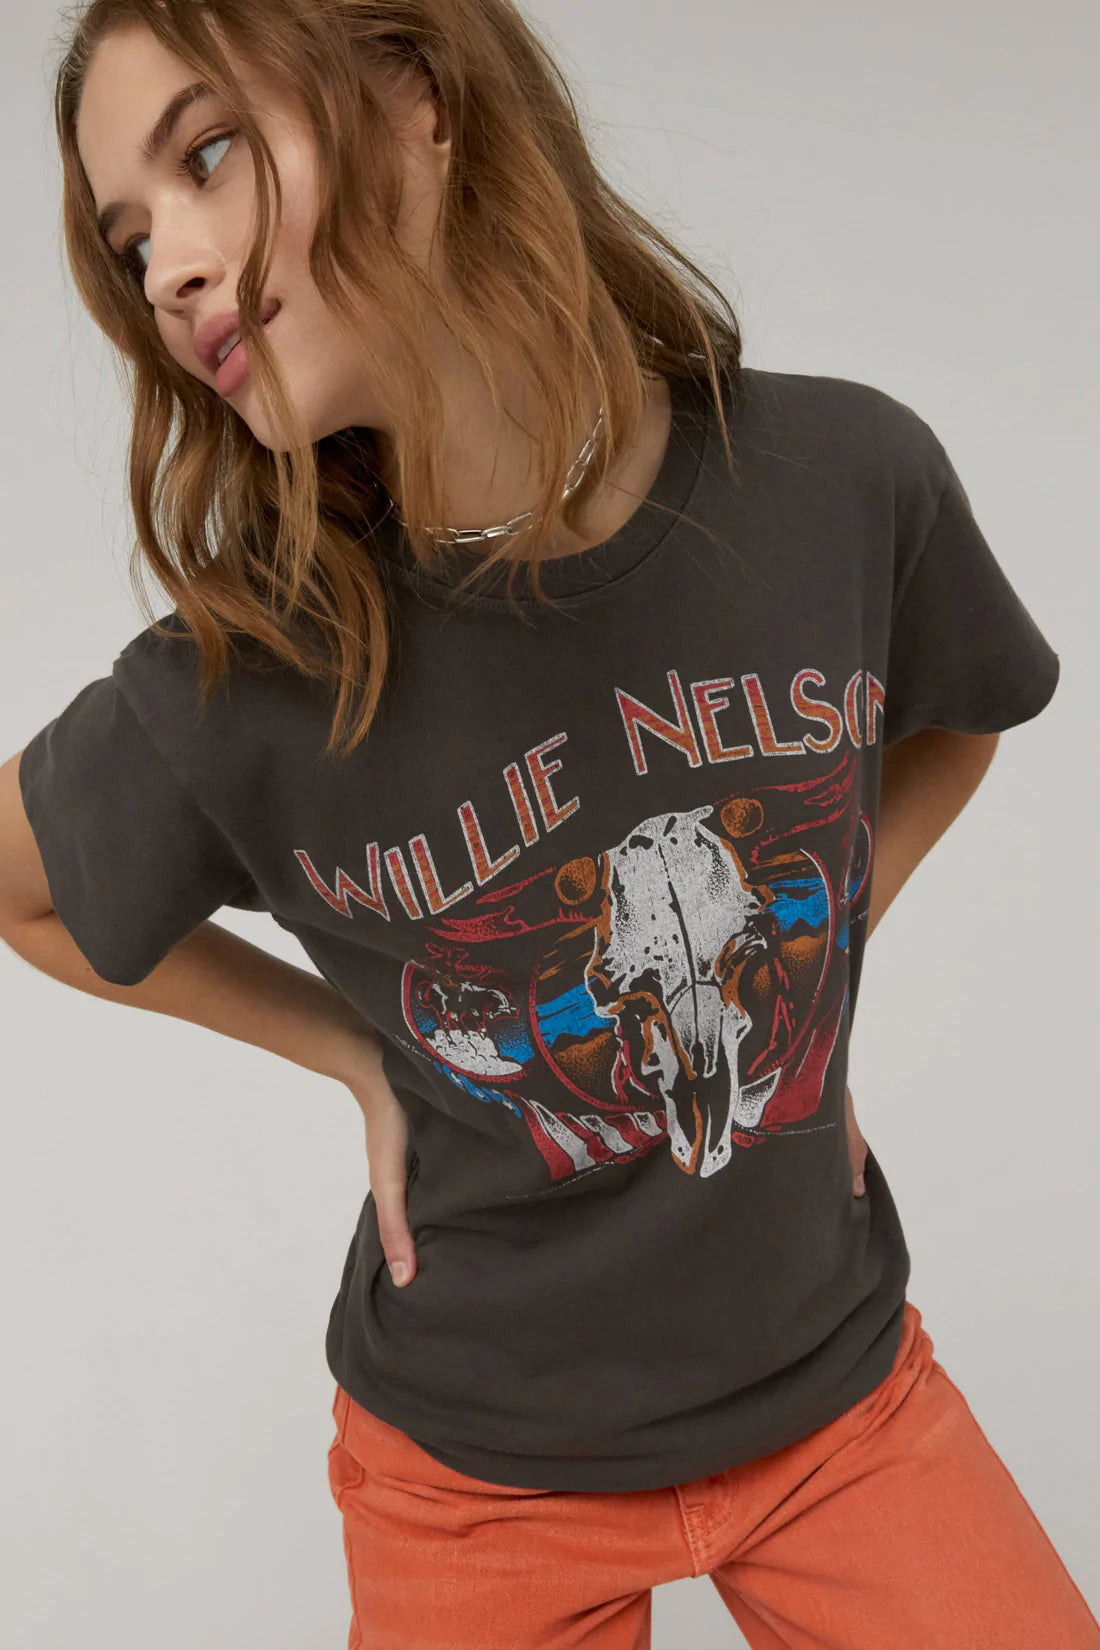 Willie Nelson And Family Tour Tee